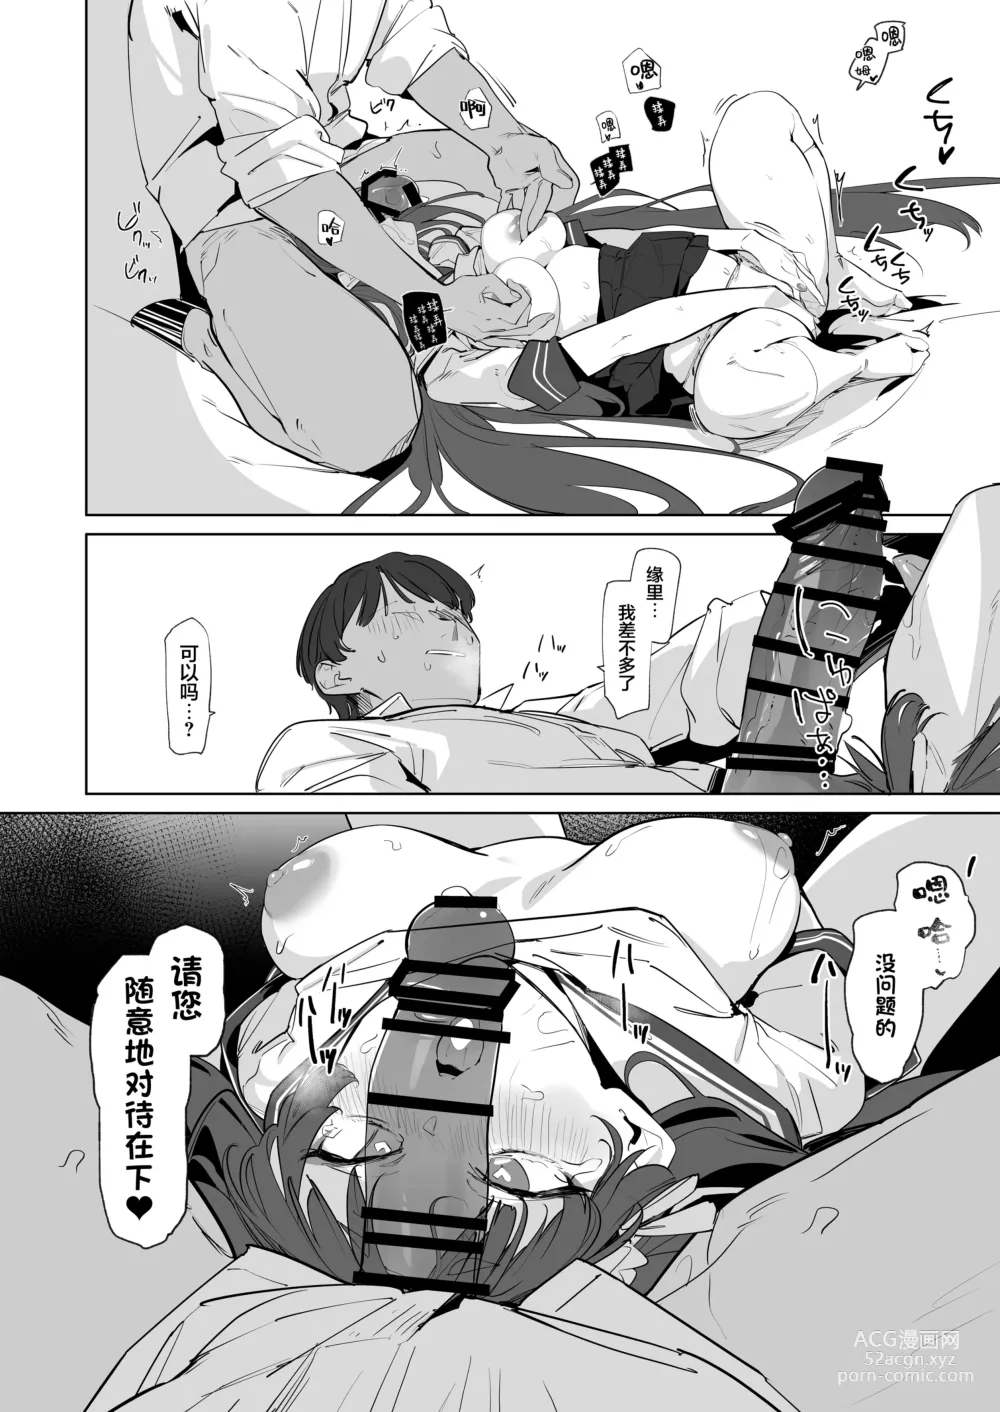 Page 10 of doujinshi 今日也请多多指导在下